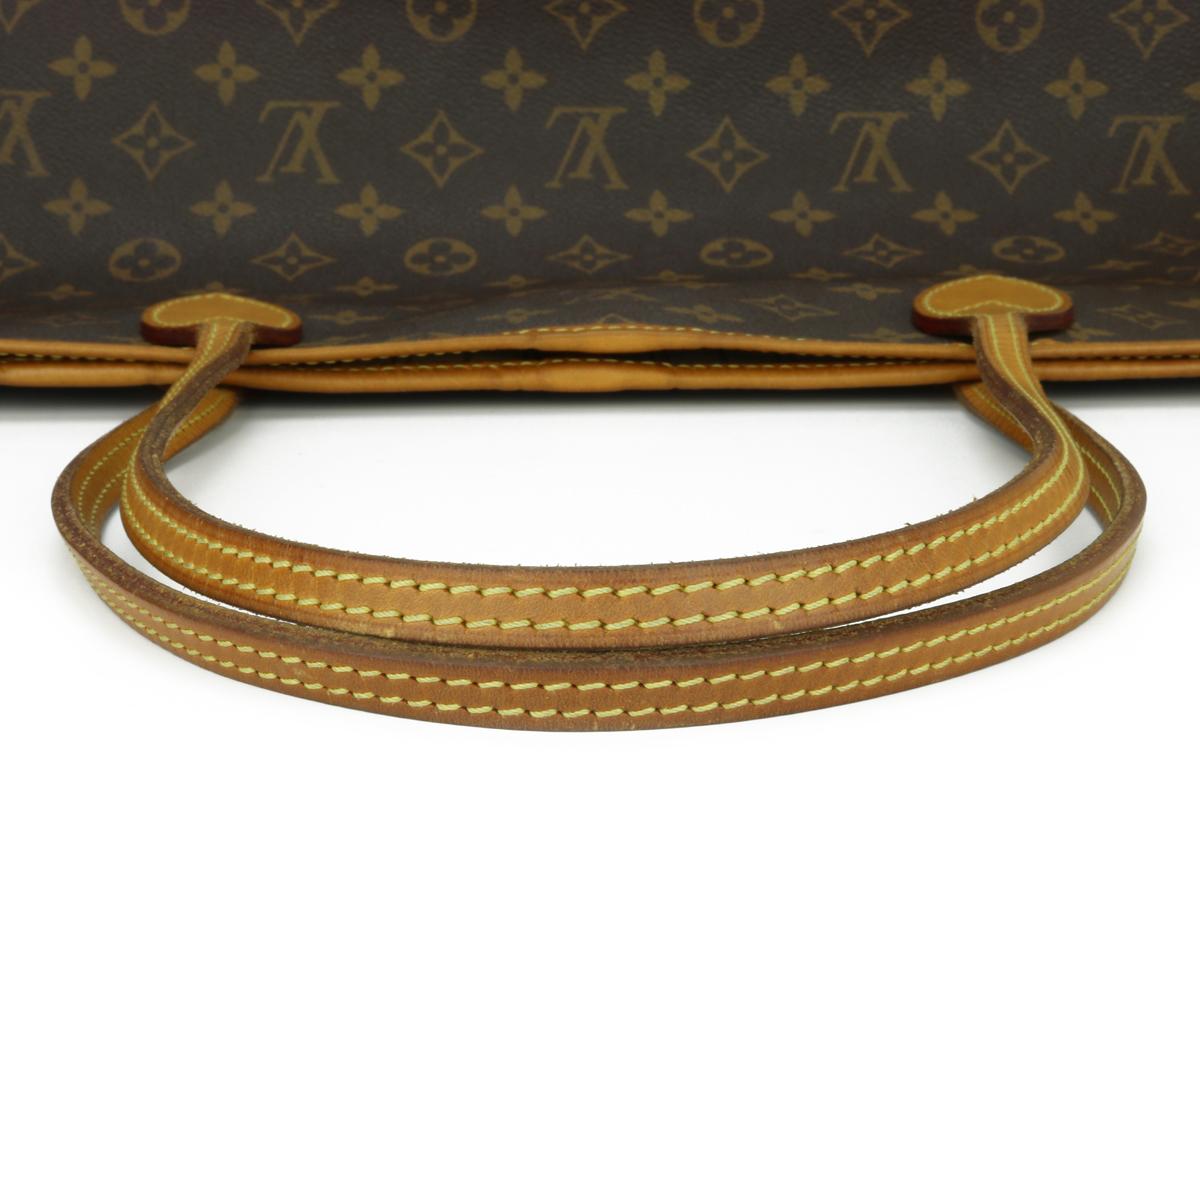 Louis Vuitton Neverfull GM Bag in Monogram with Beige Interior 2007 8